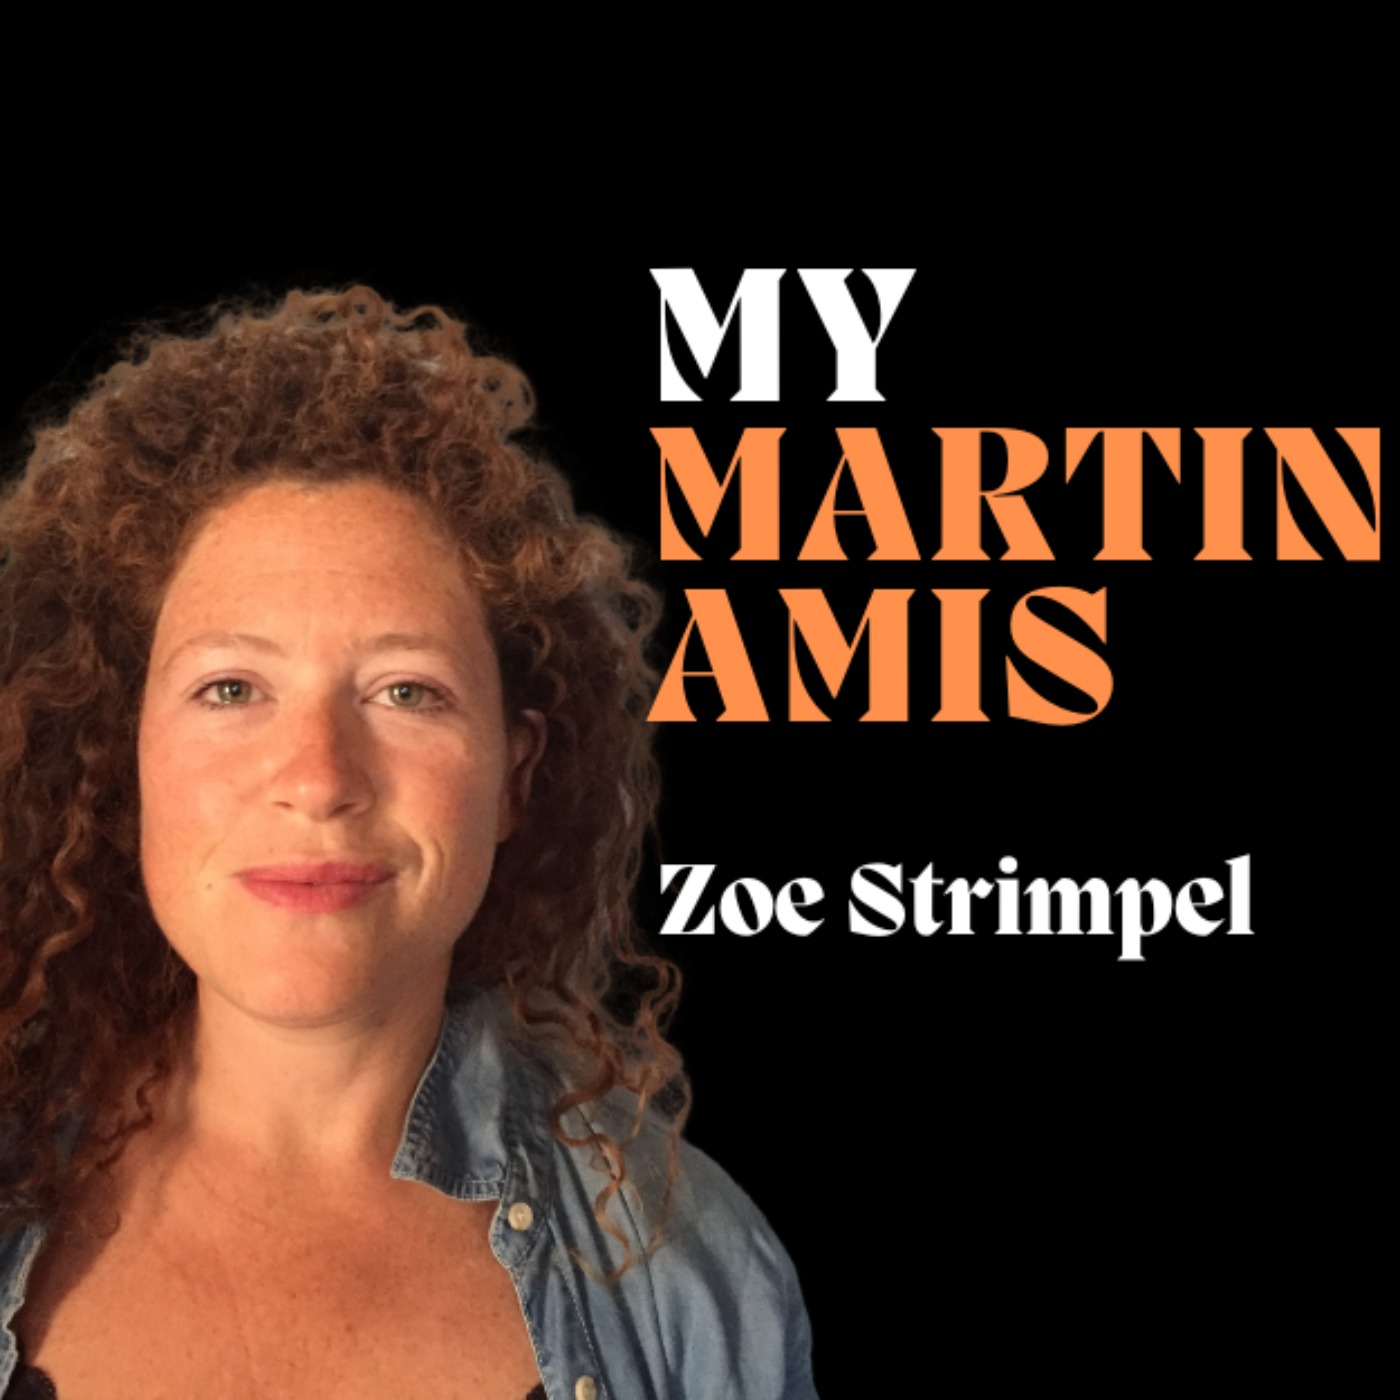 cover art for "Not everyone even remotely has Amis's descriptive ability." Zoe Strimpel